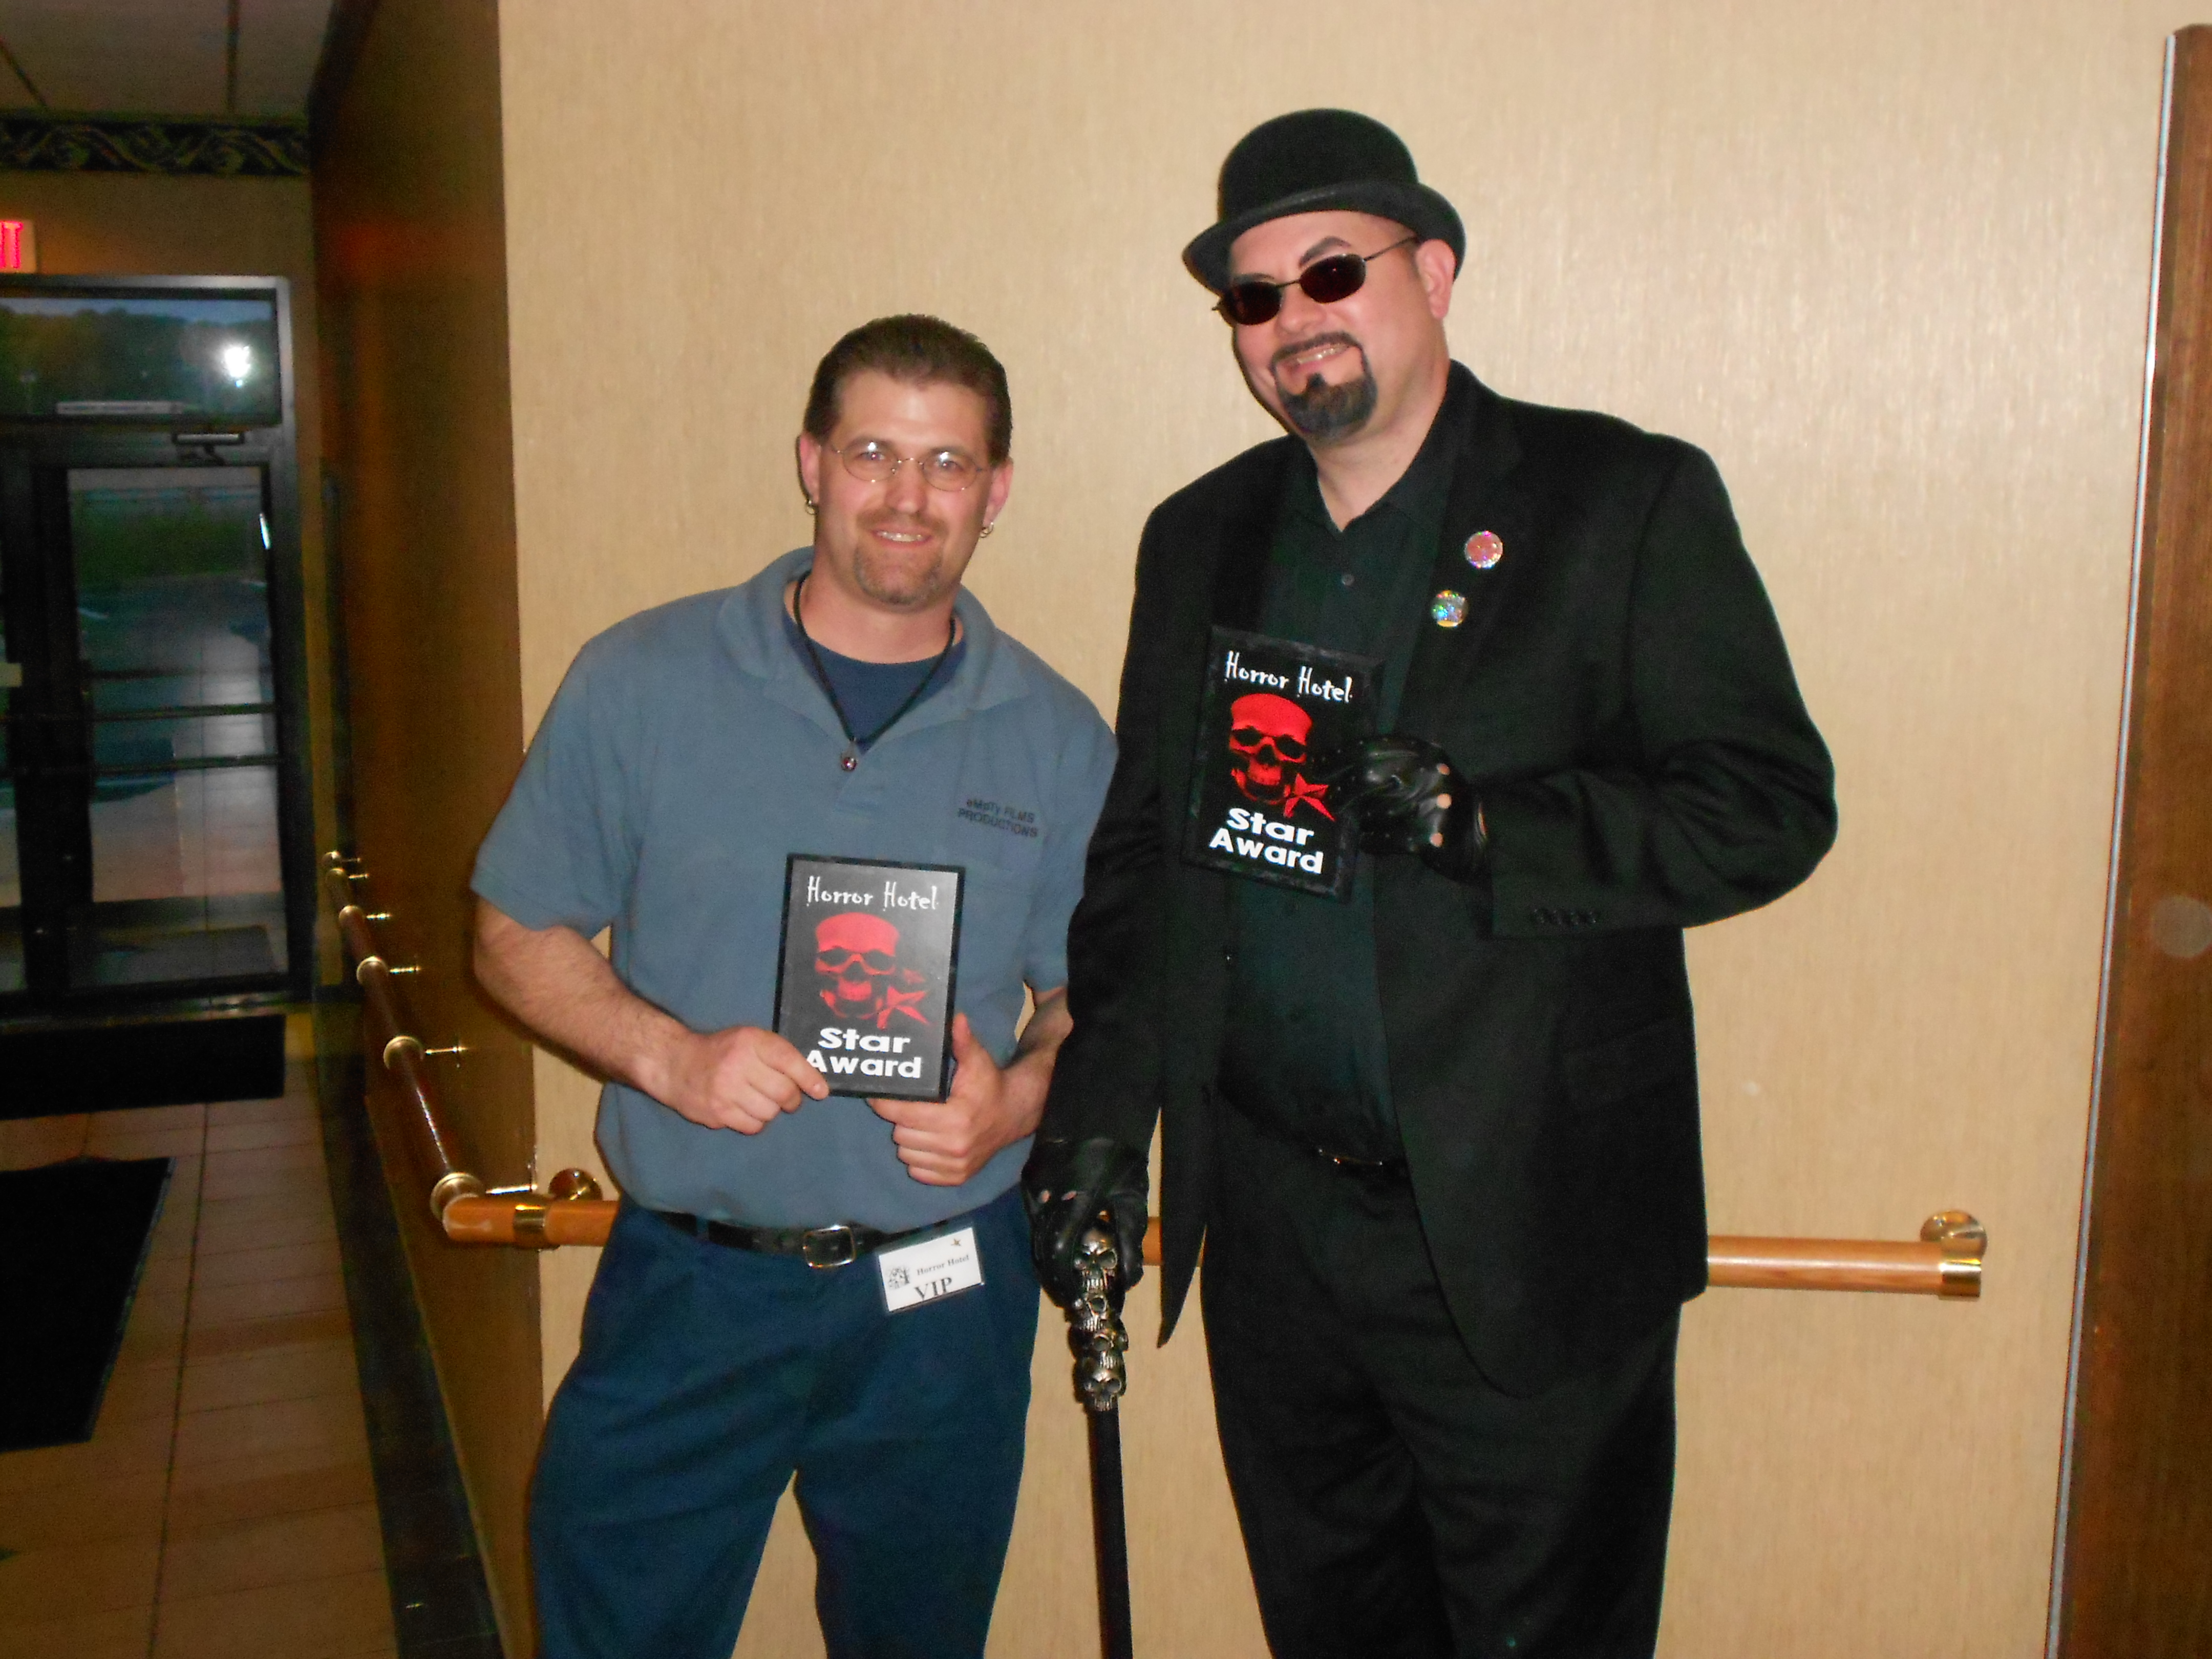 Accepting an Award along with Baron Bloodstorm at the 2012 Horror Hotel Film Convention.